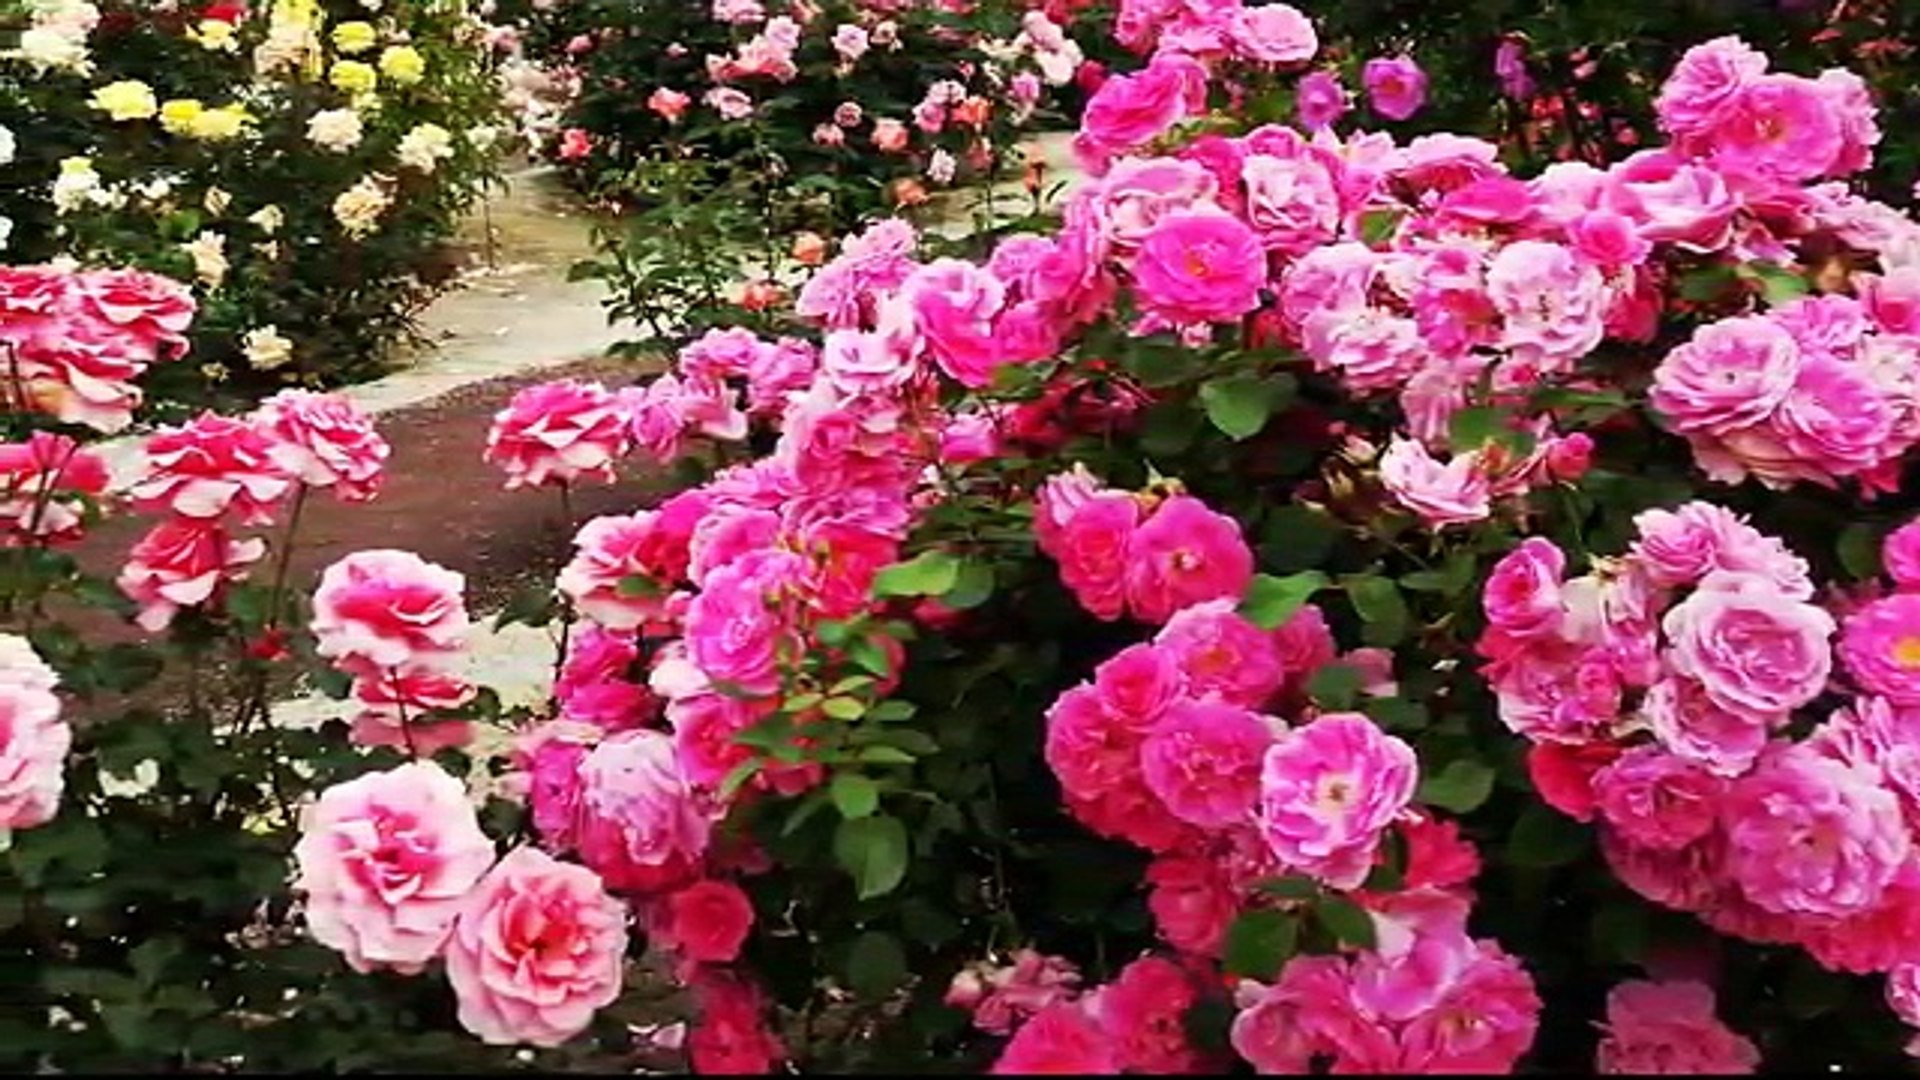 4K Most beautiful rose flowers, flower shrubs and colorful garden that you may have never